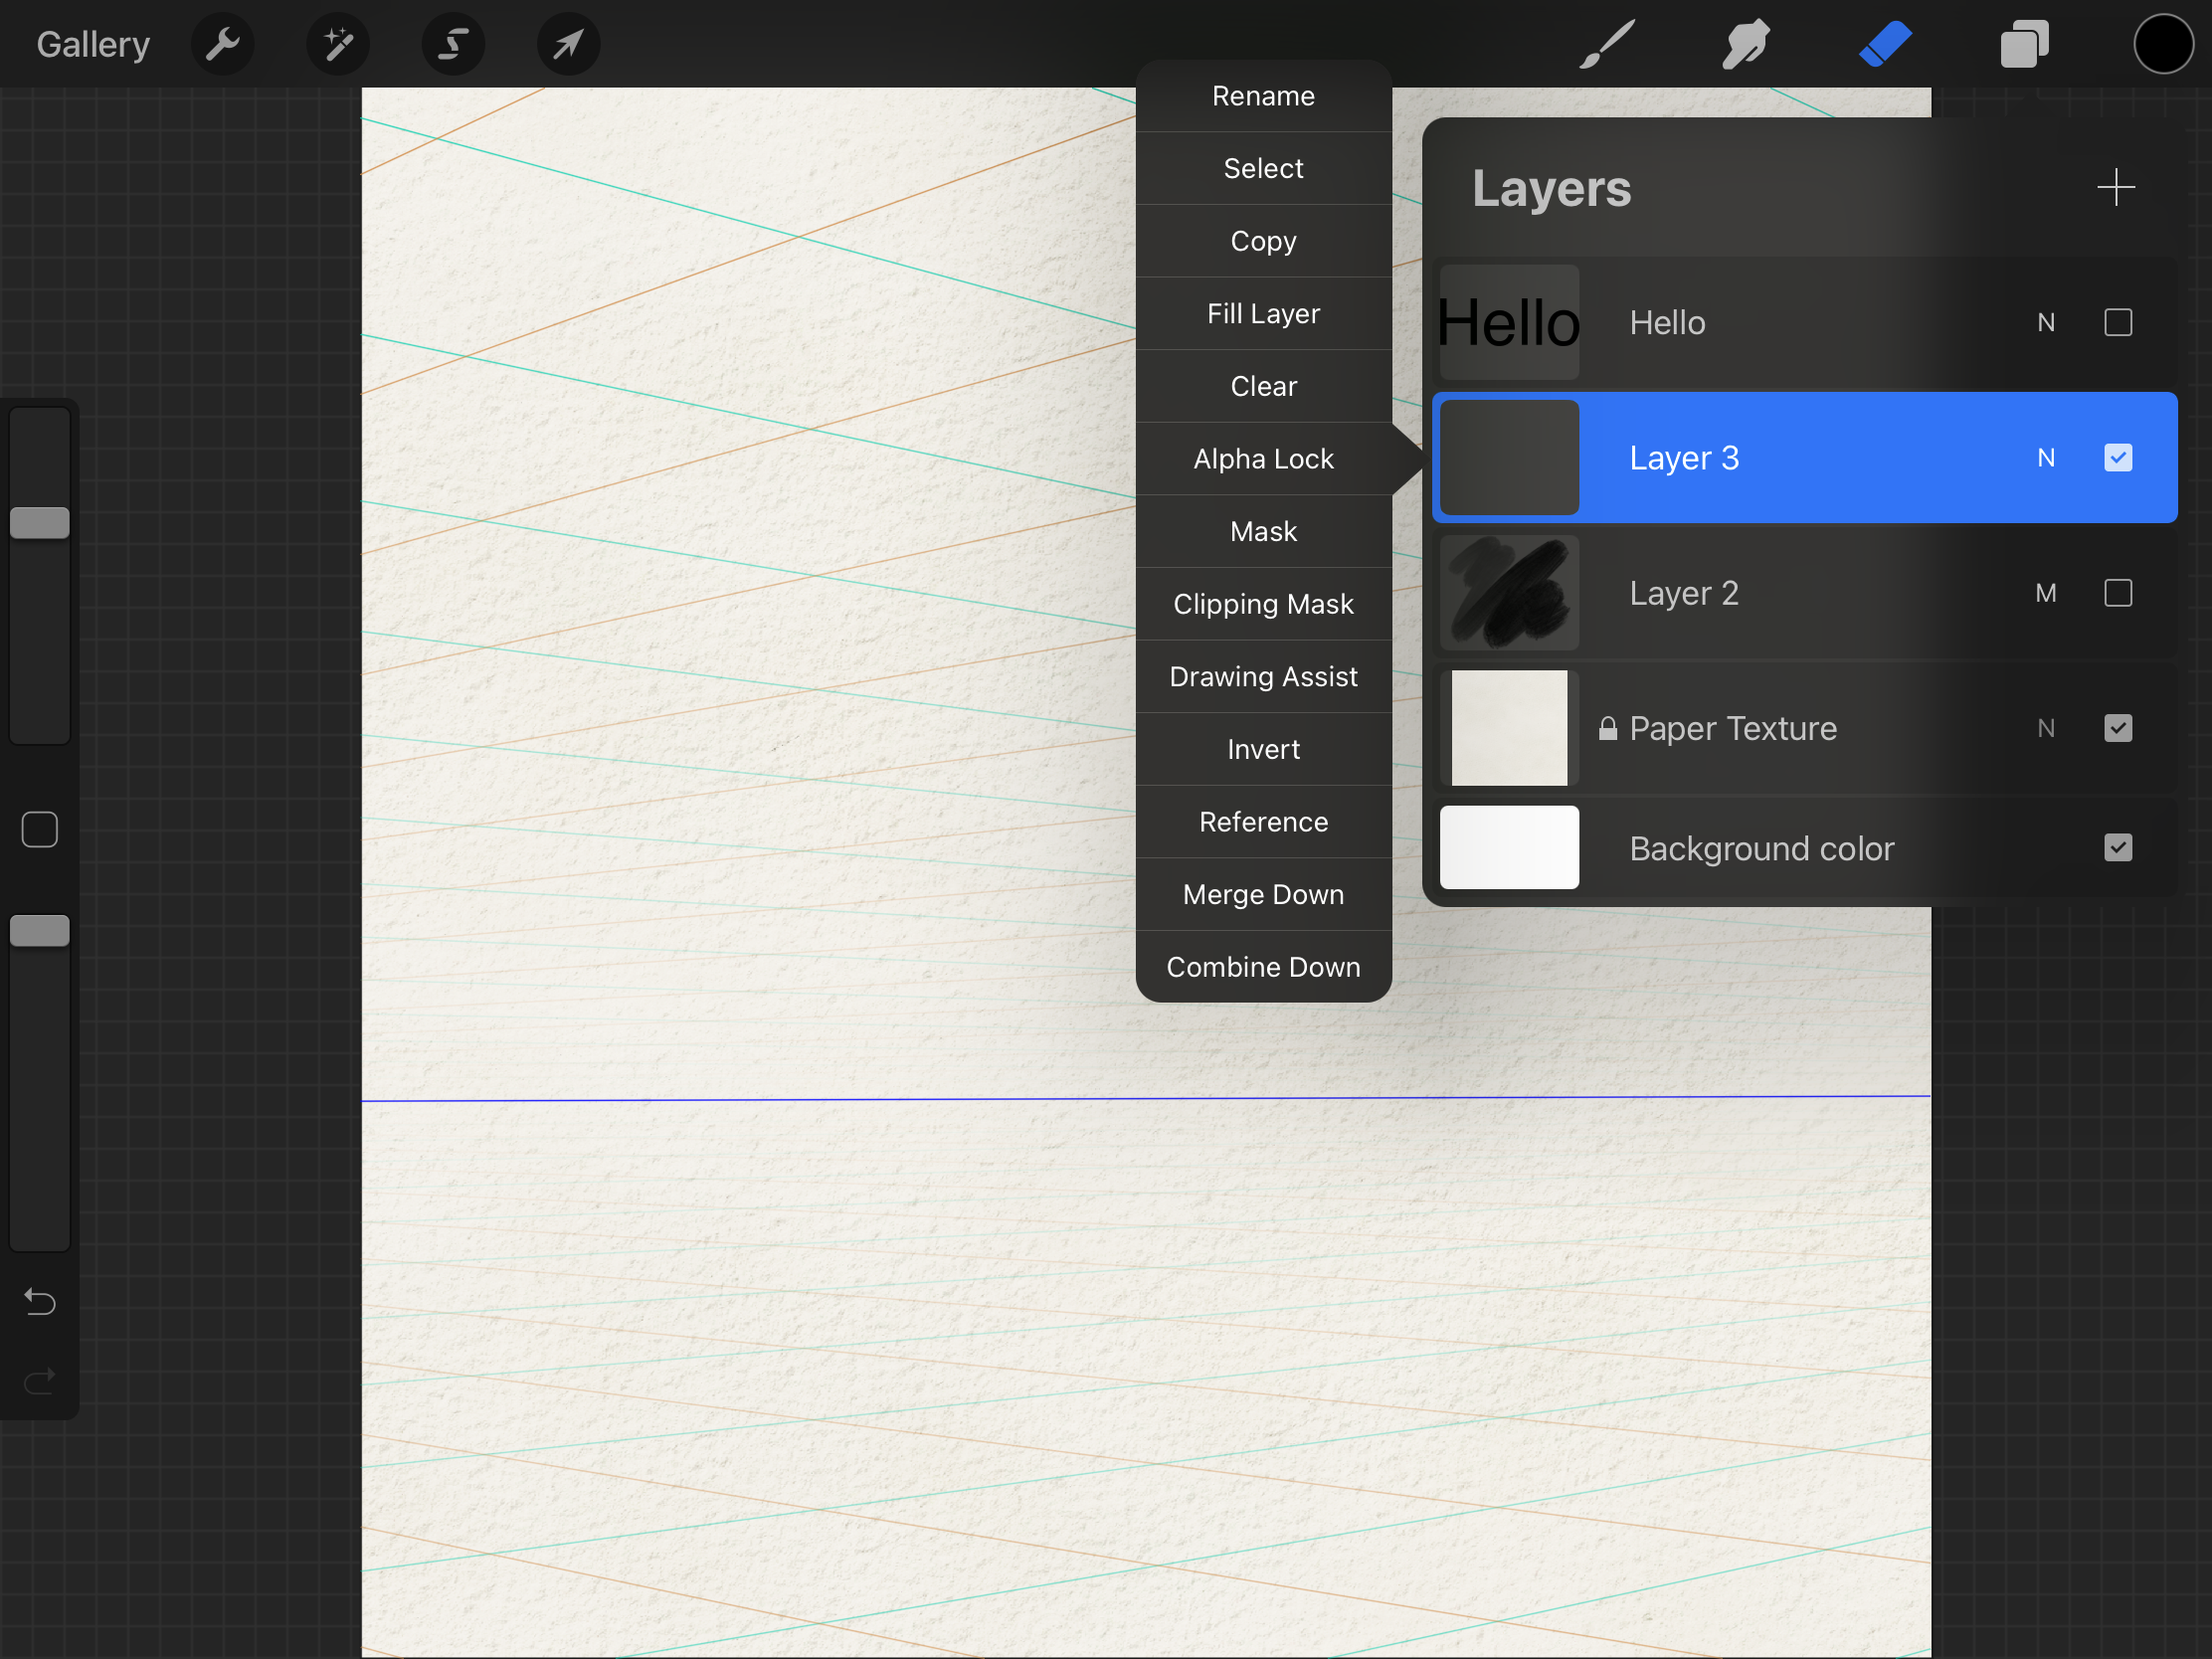 It shows how to activate the drawing assistant to follow the drawing guides on a layer.